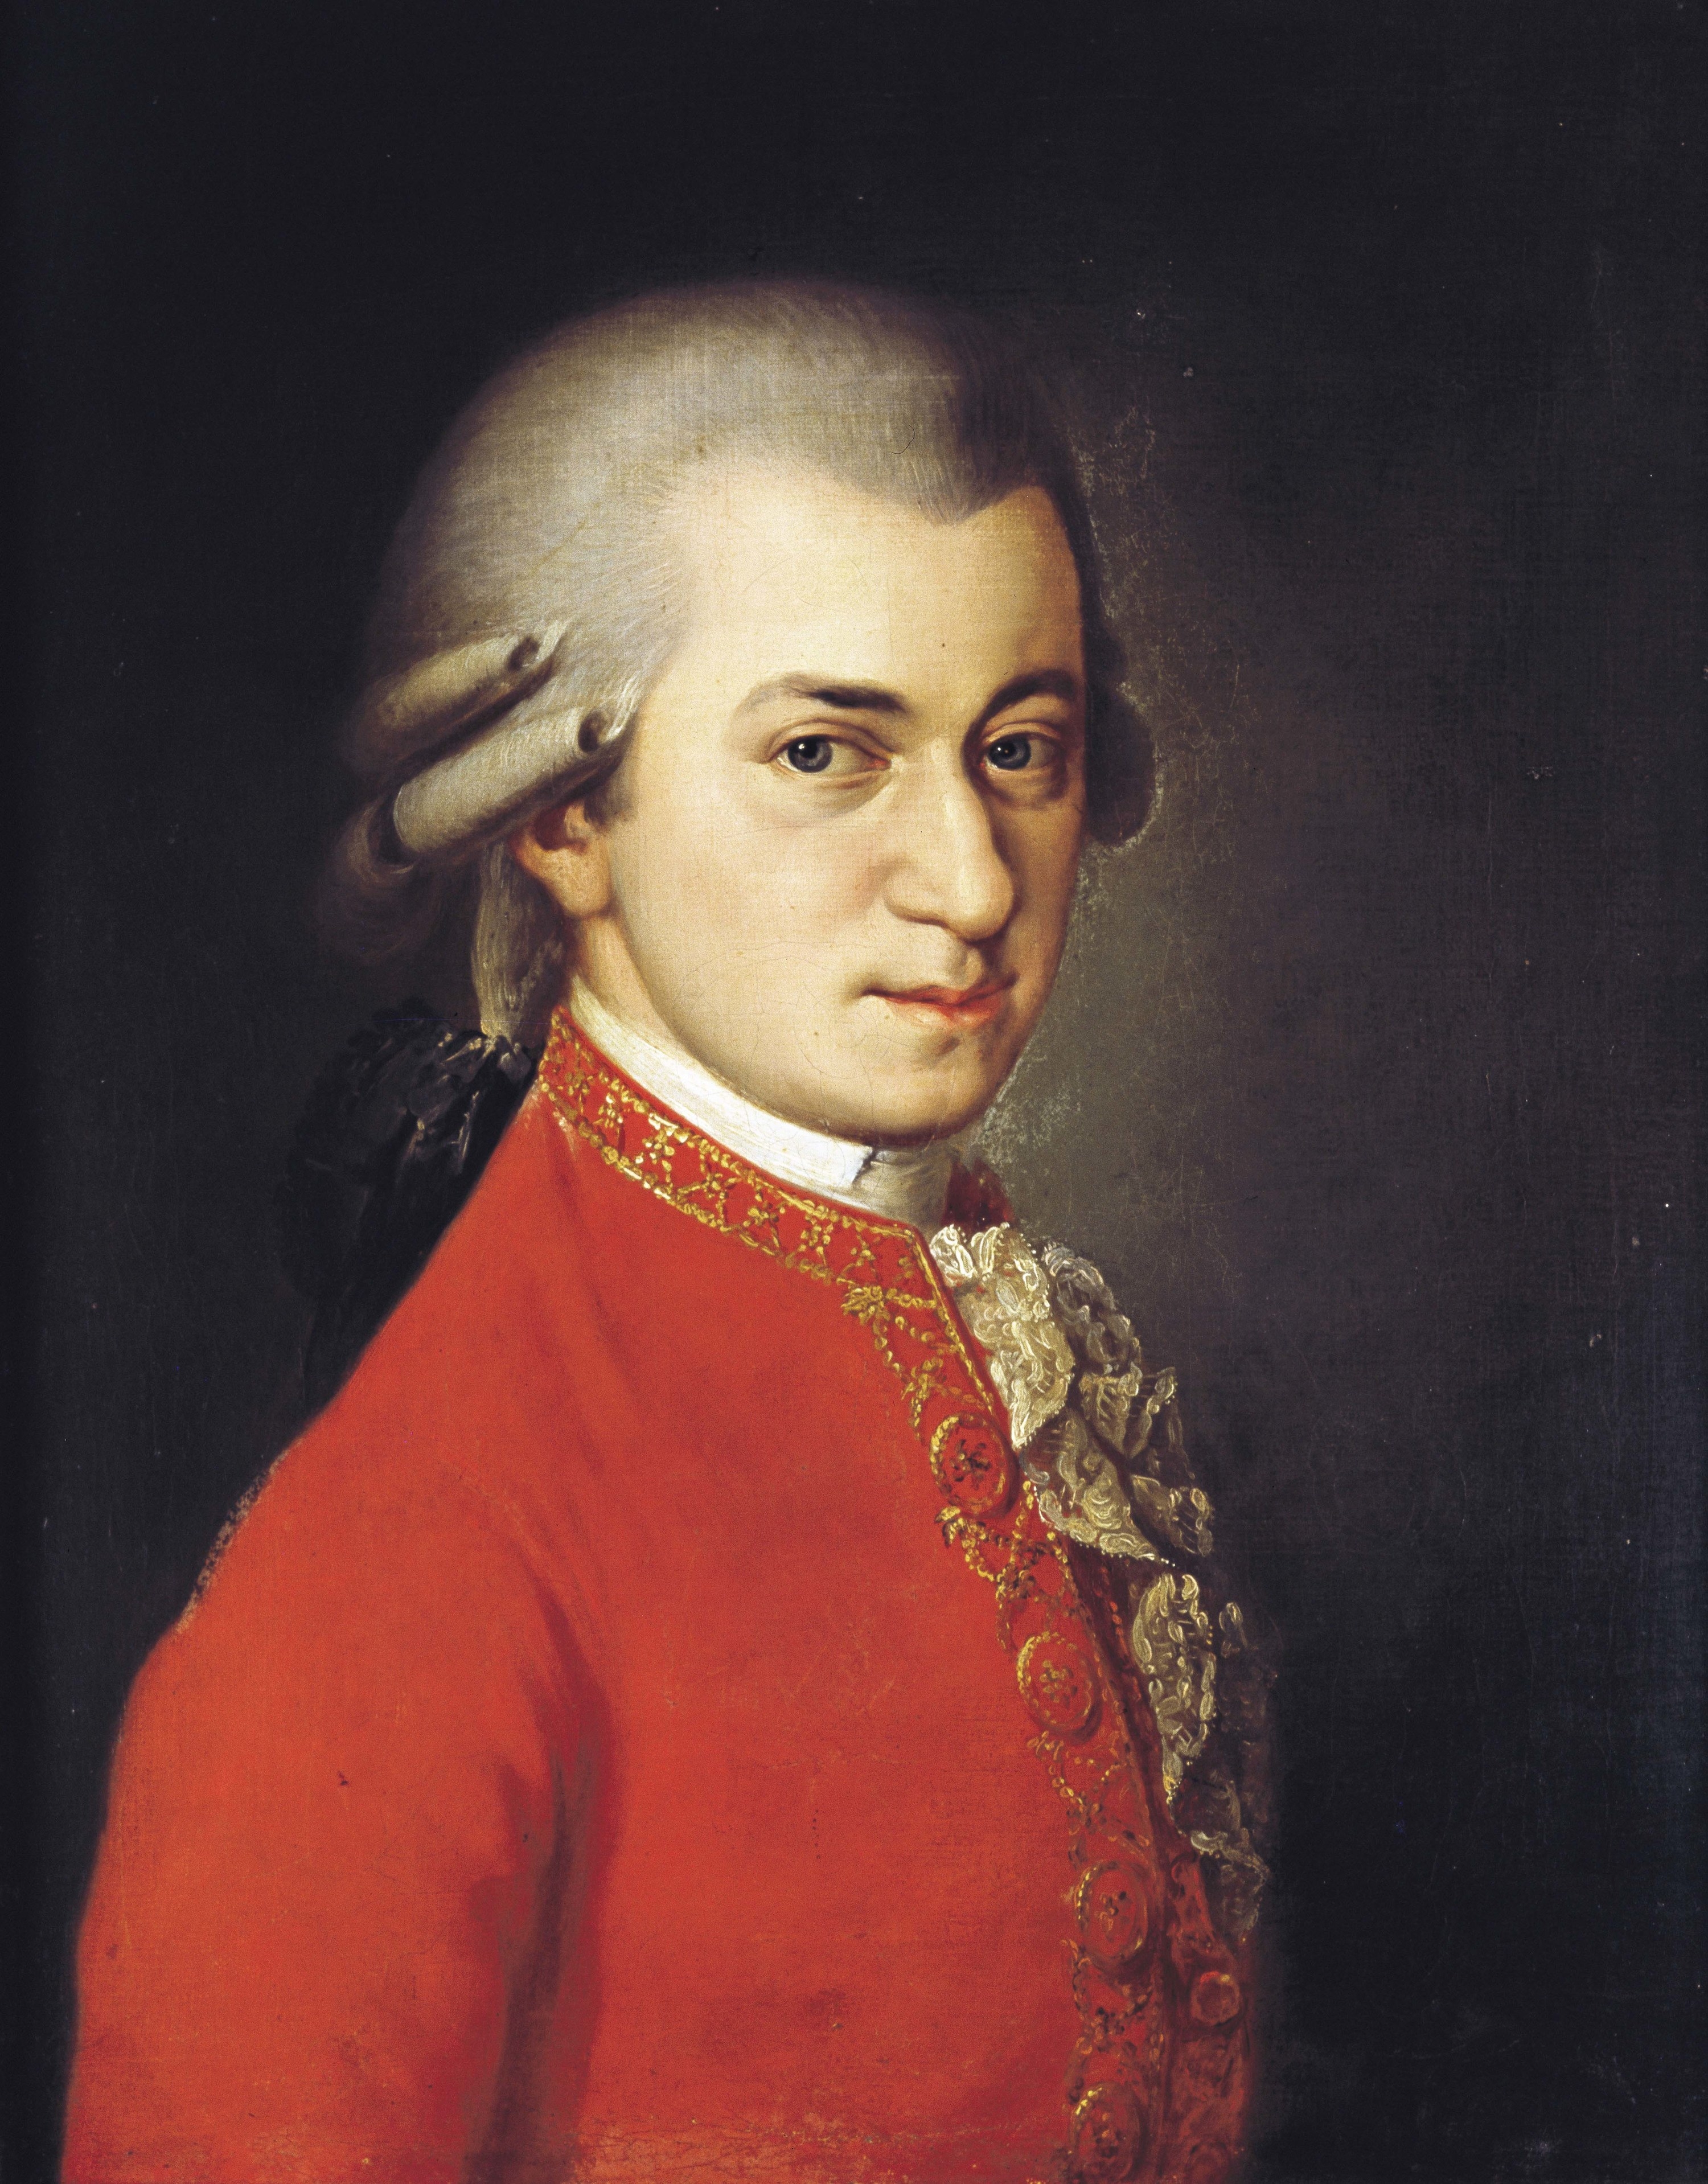 painting of mozart